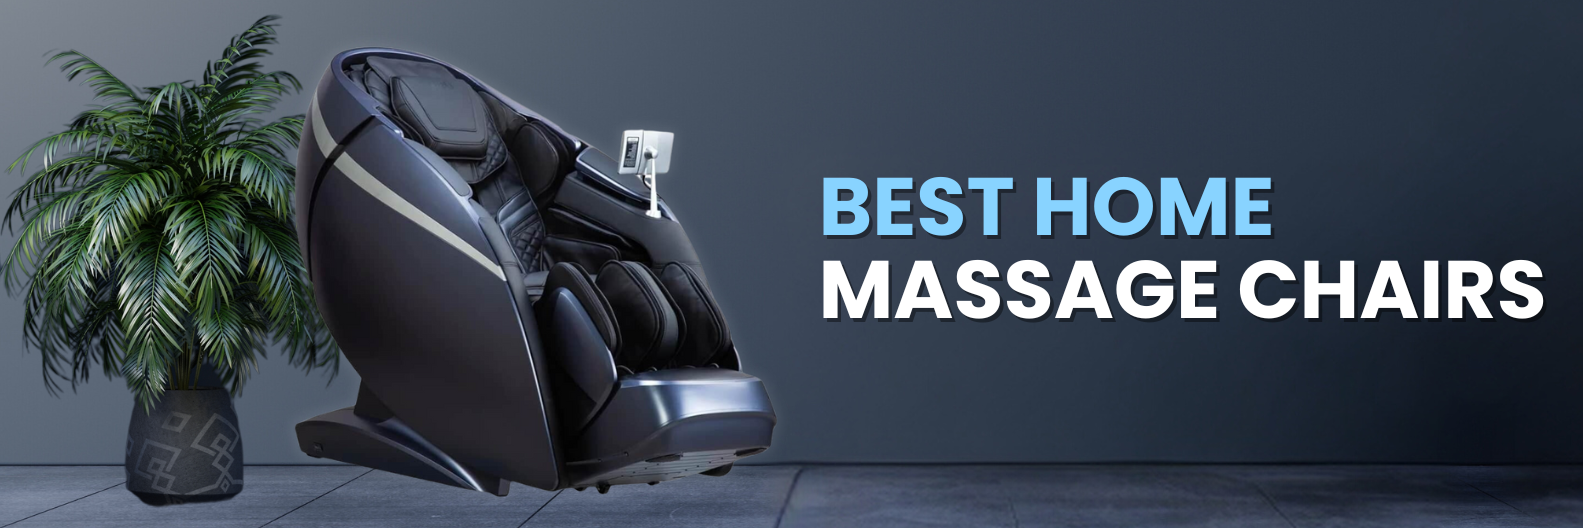 Turn your home into a spa oasis with luxury massage chairs. Explore the highest-rated home massage chairs for an unparalleled experience of relaxation and comfort.